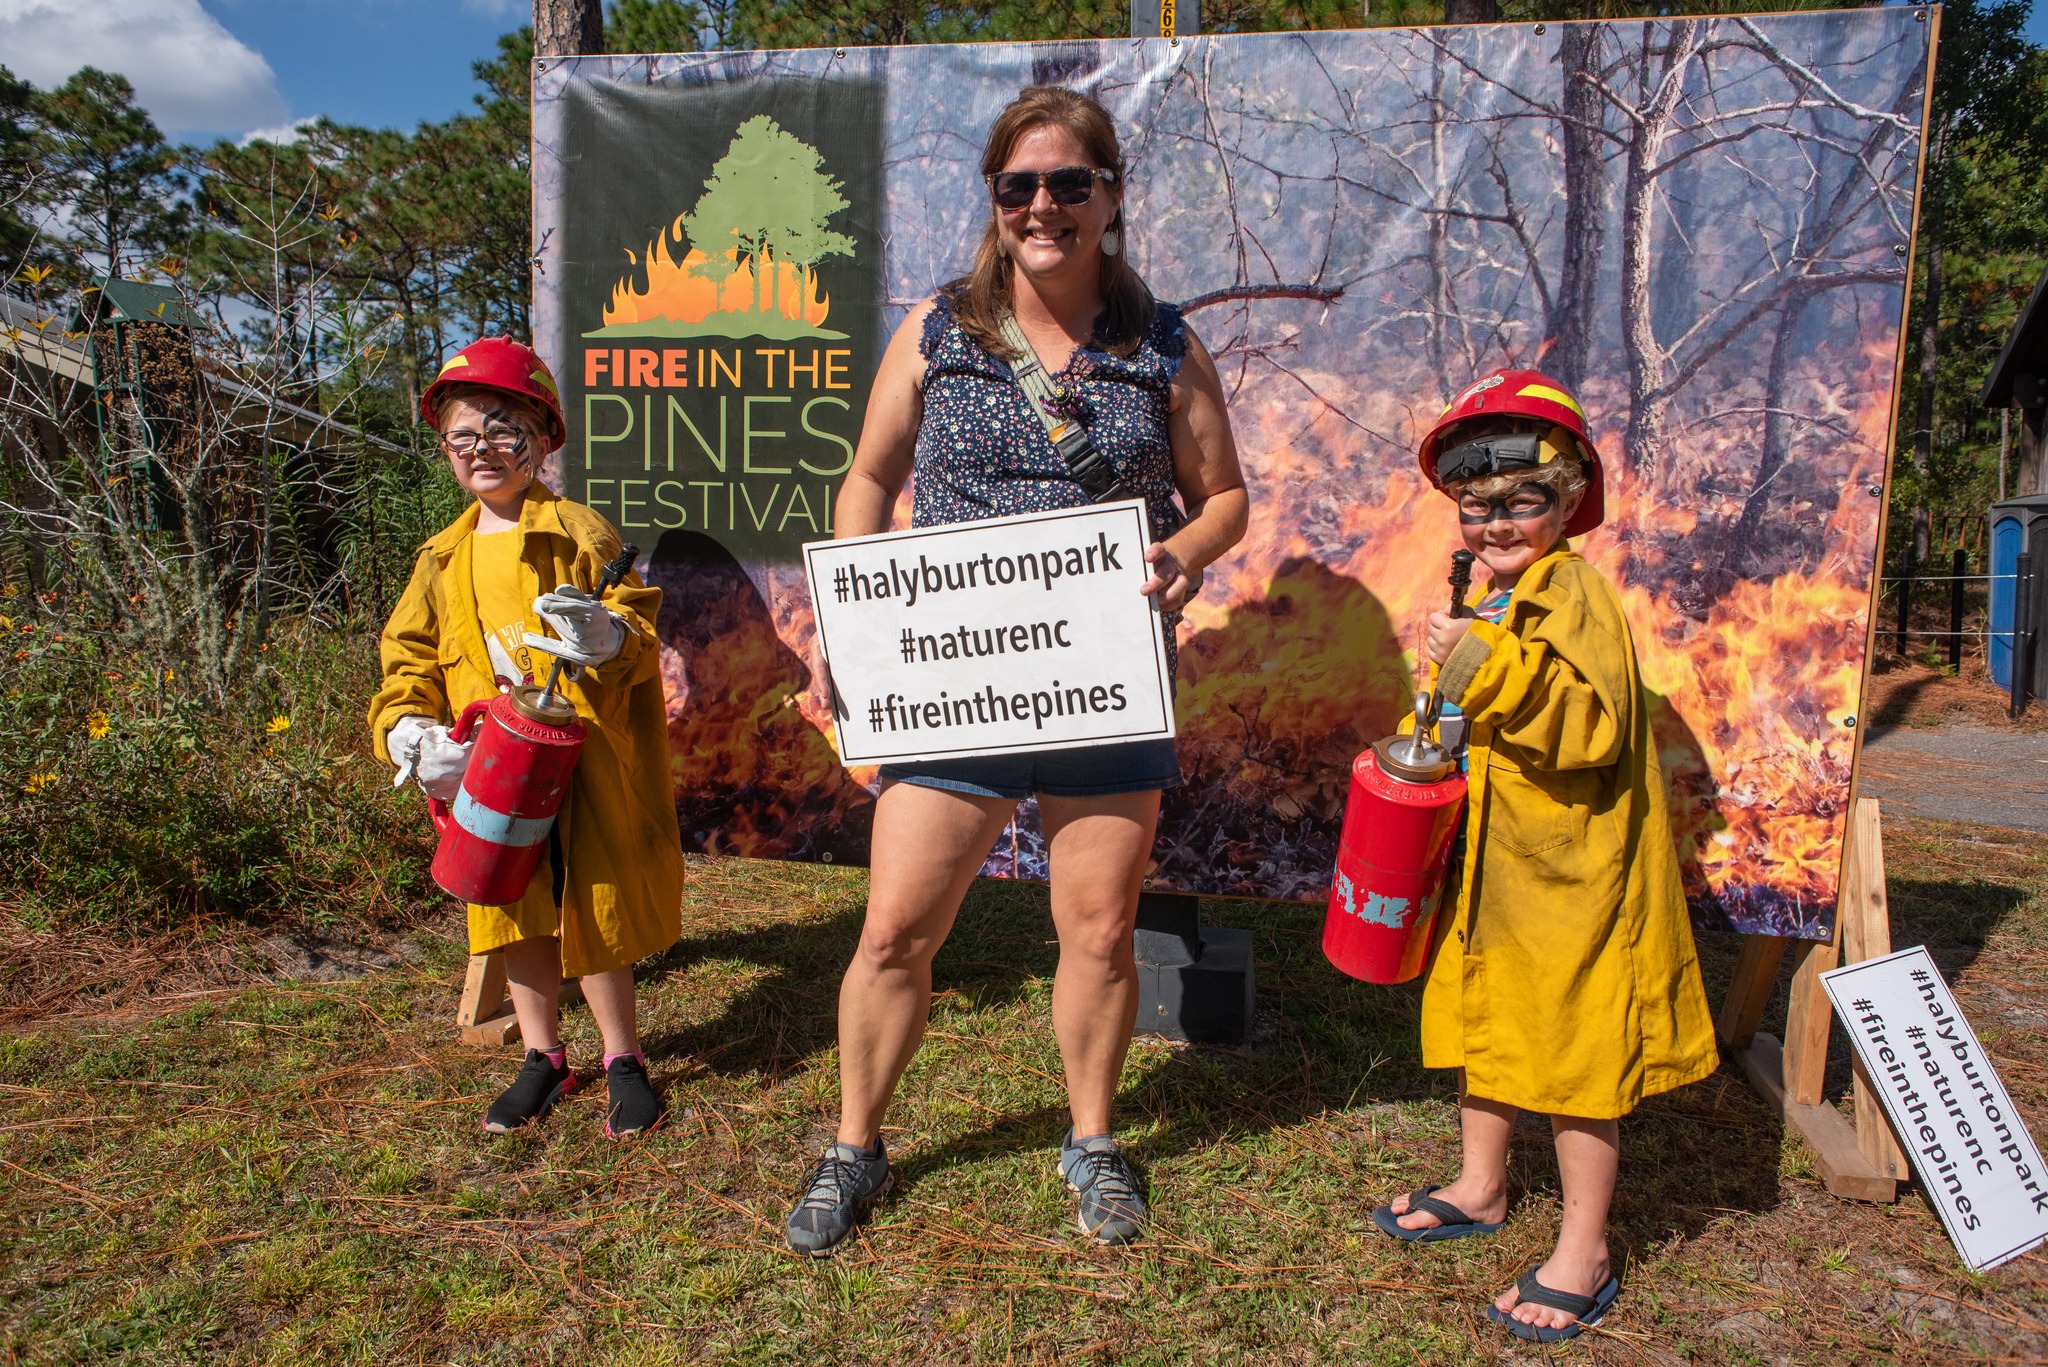 Women and kids posing  in front of fire in the pines sign. Kids are dressed up as firefighters and  holding drip torches.